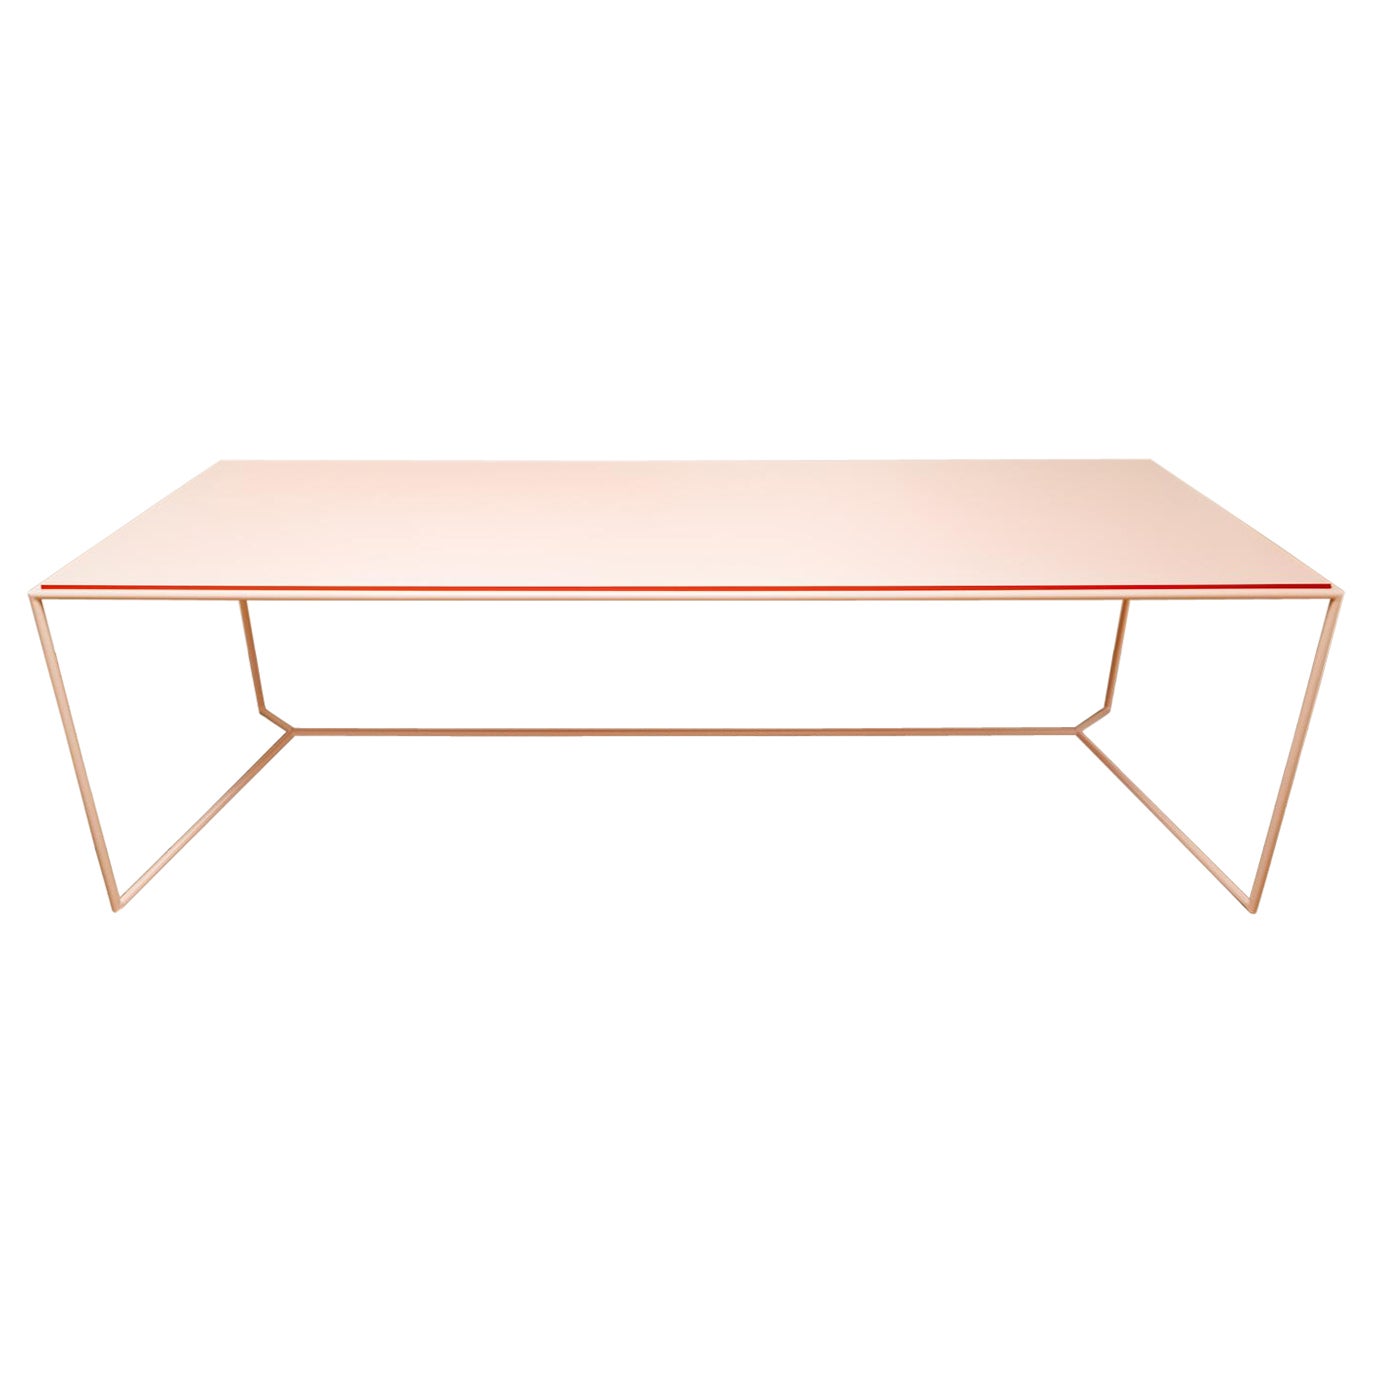 Contemporary Lacquered Steel Table with Reversible Lacquered Mdf Top